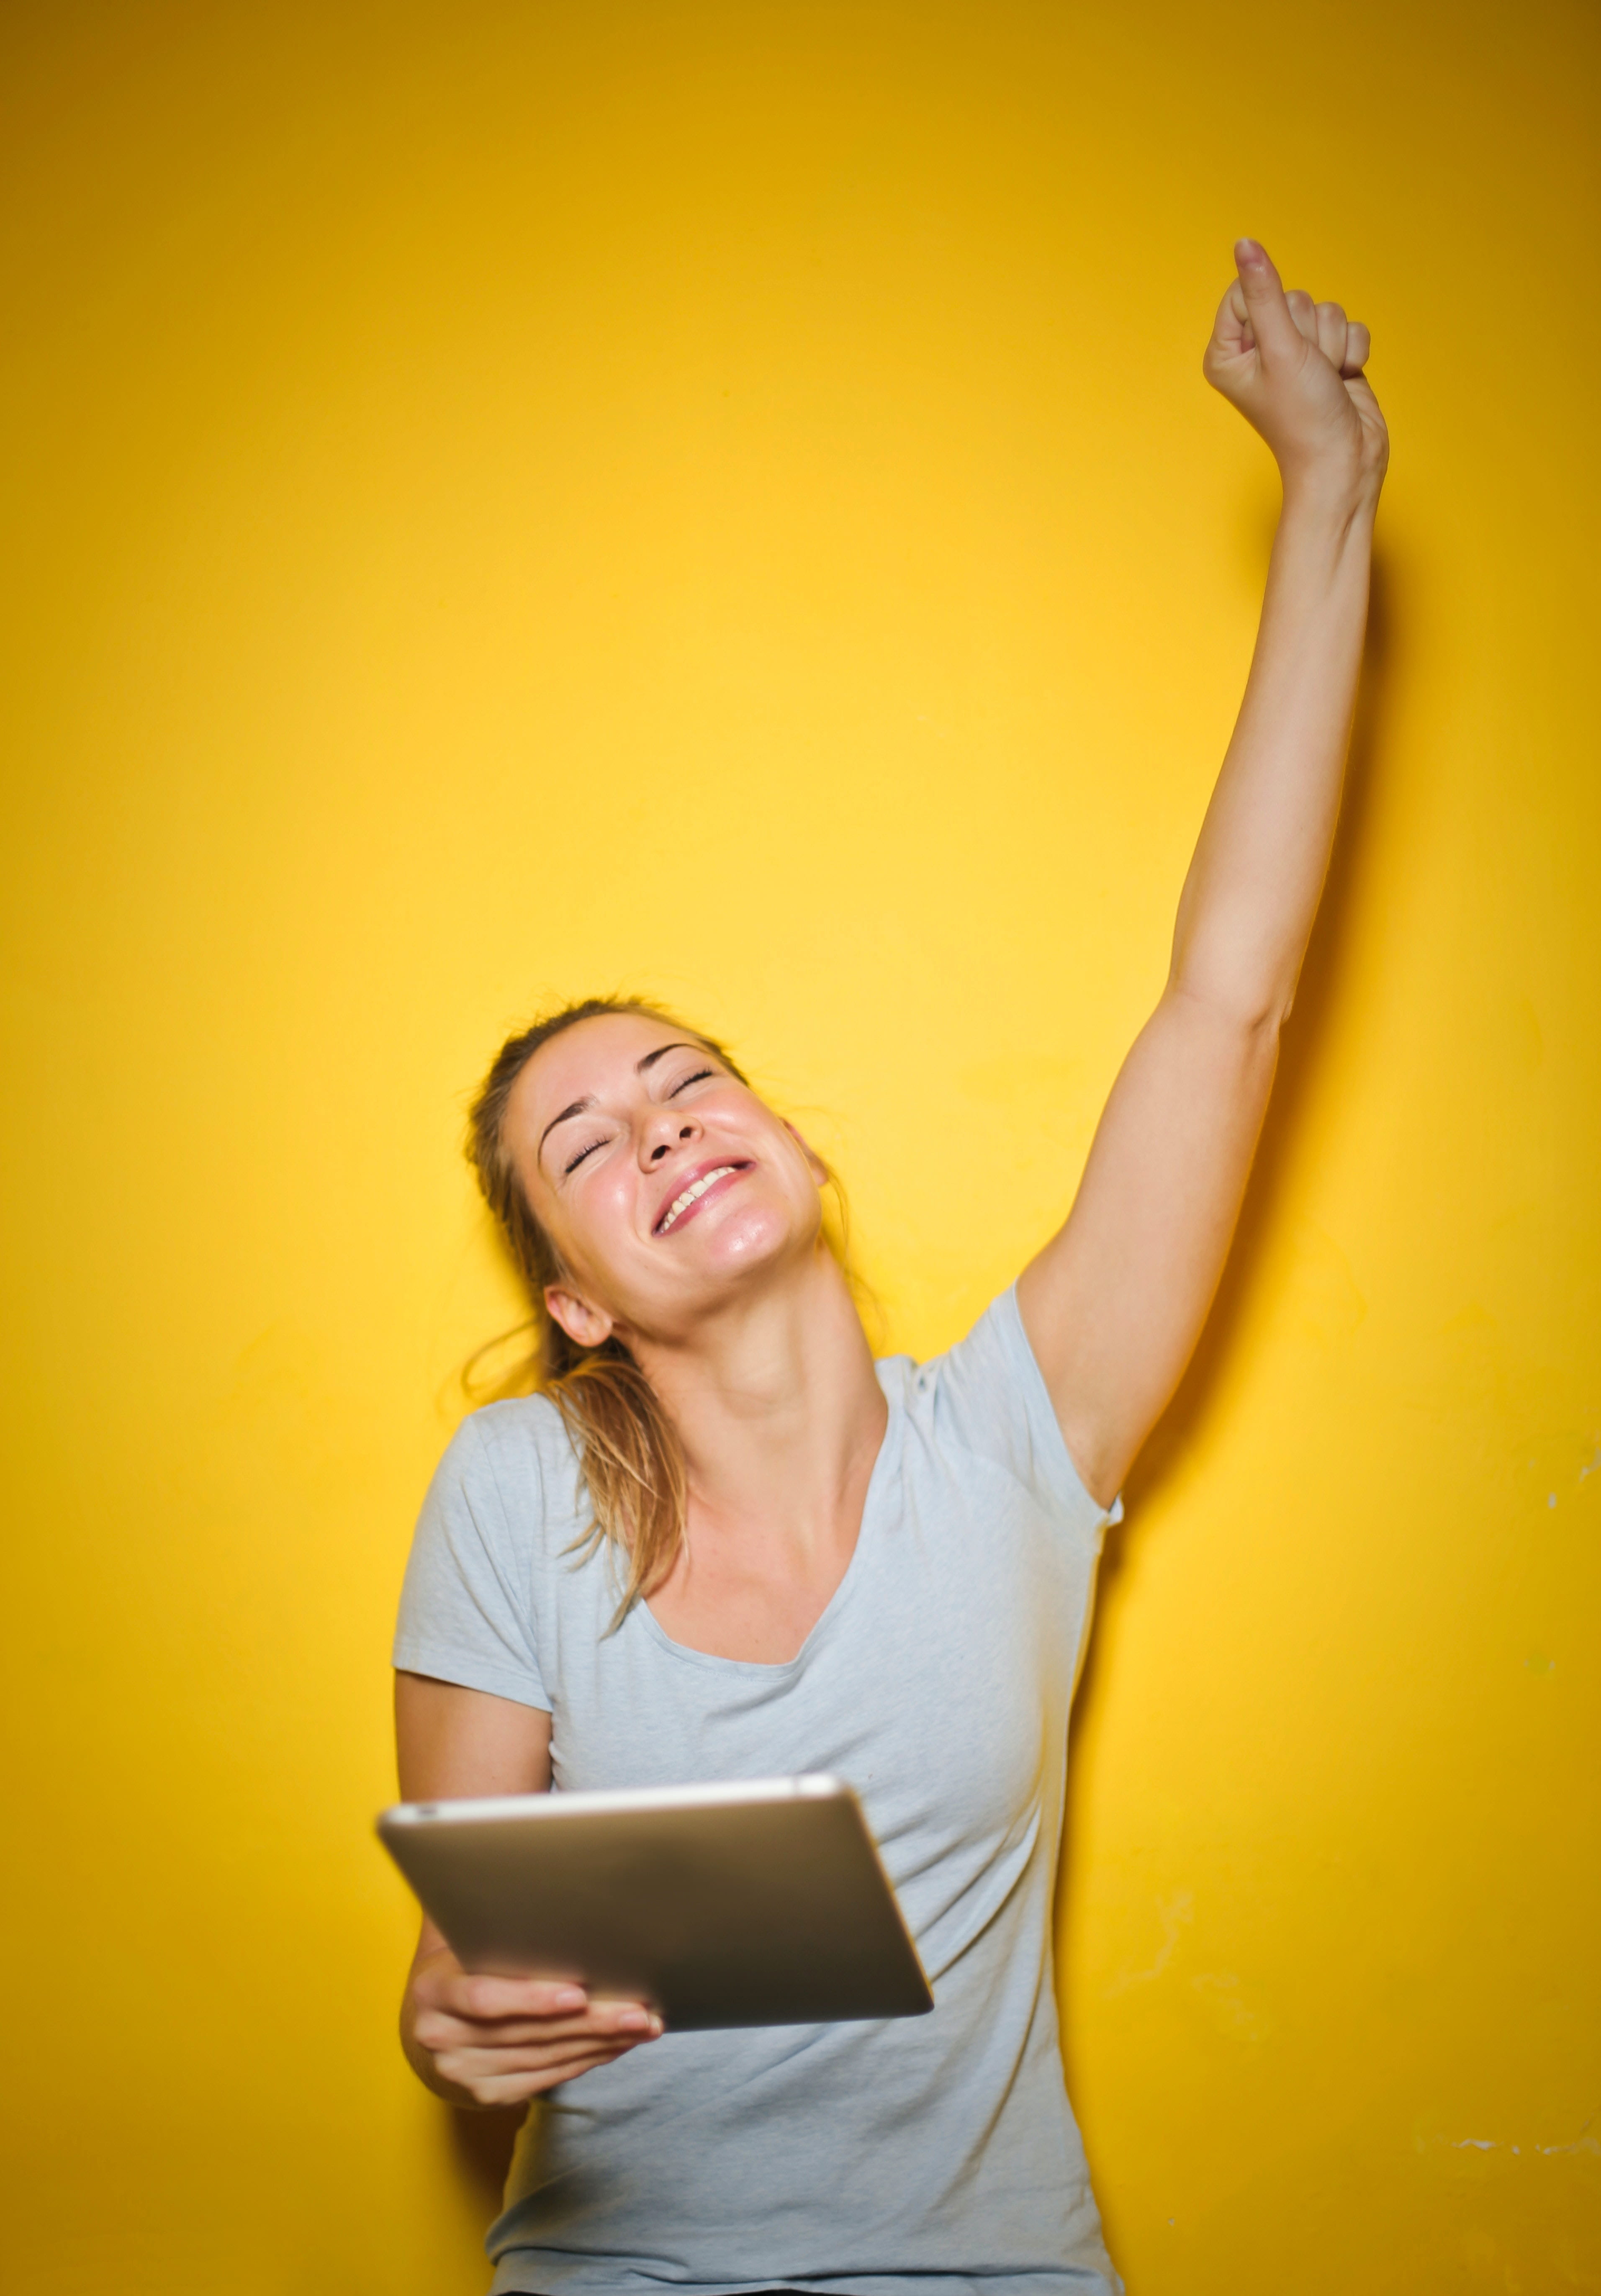 A woman holding an iPad in one hand with the other arm raised into a fist upwards. She is smiling. There is a yellow background.